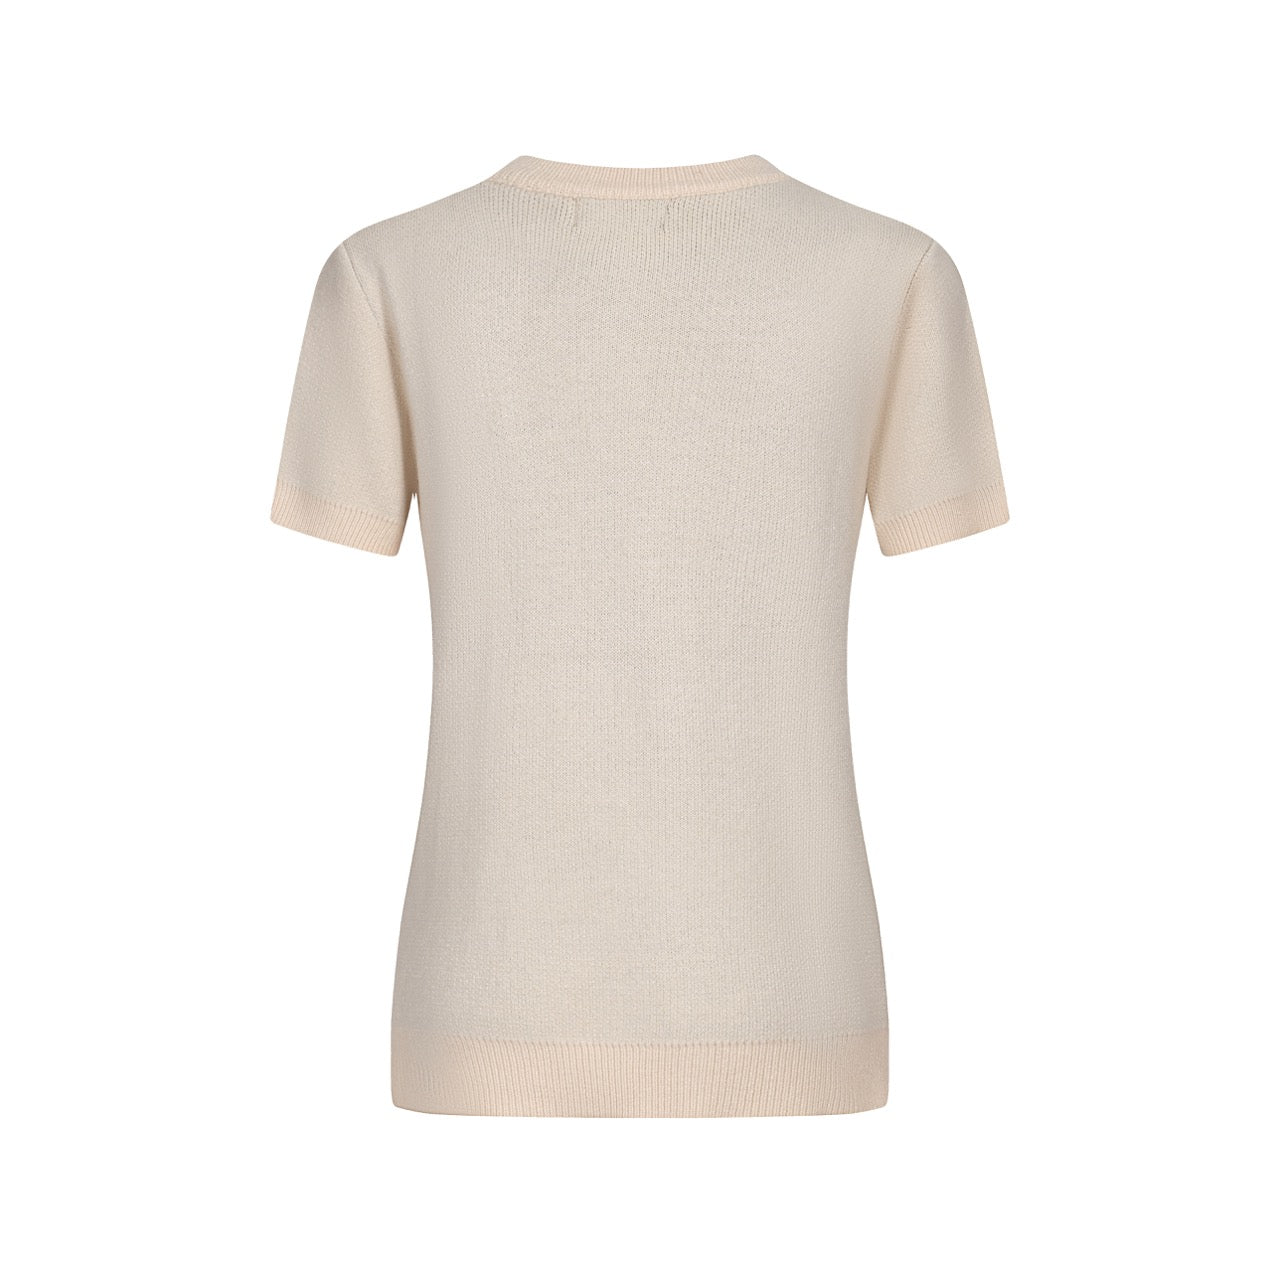 Women's knitted T-shirt with apricot flowers